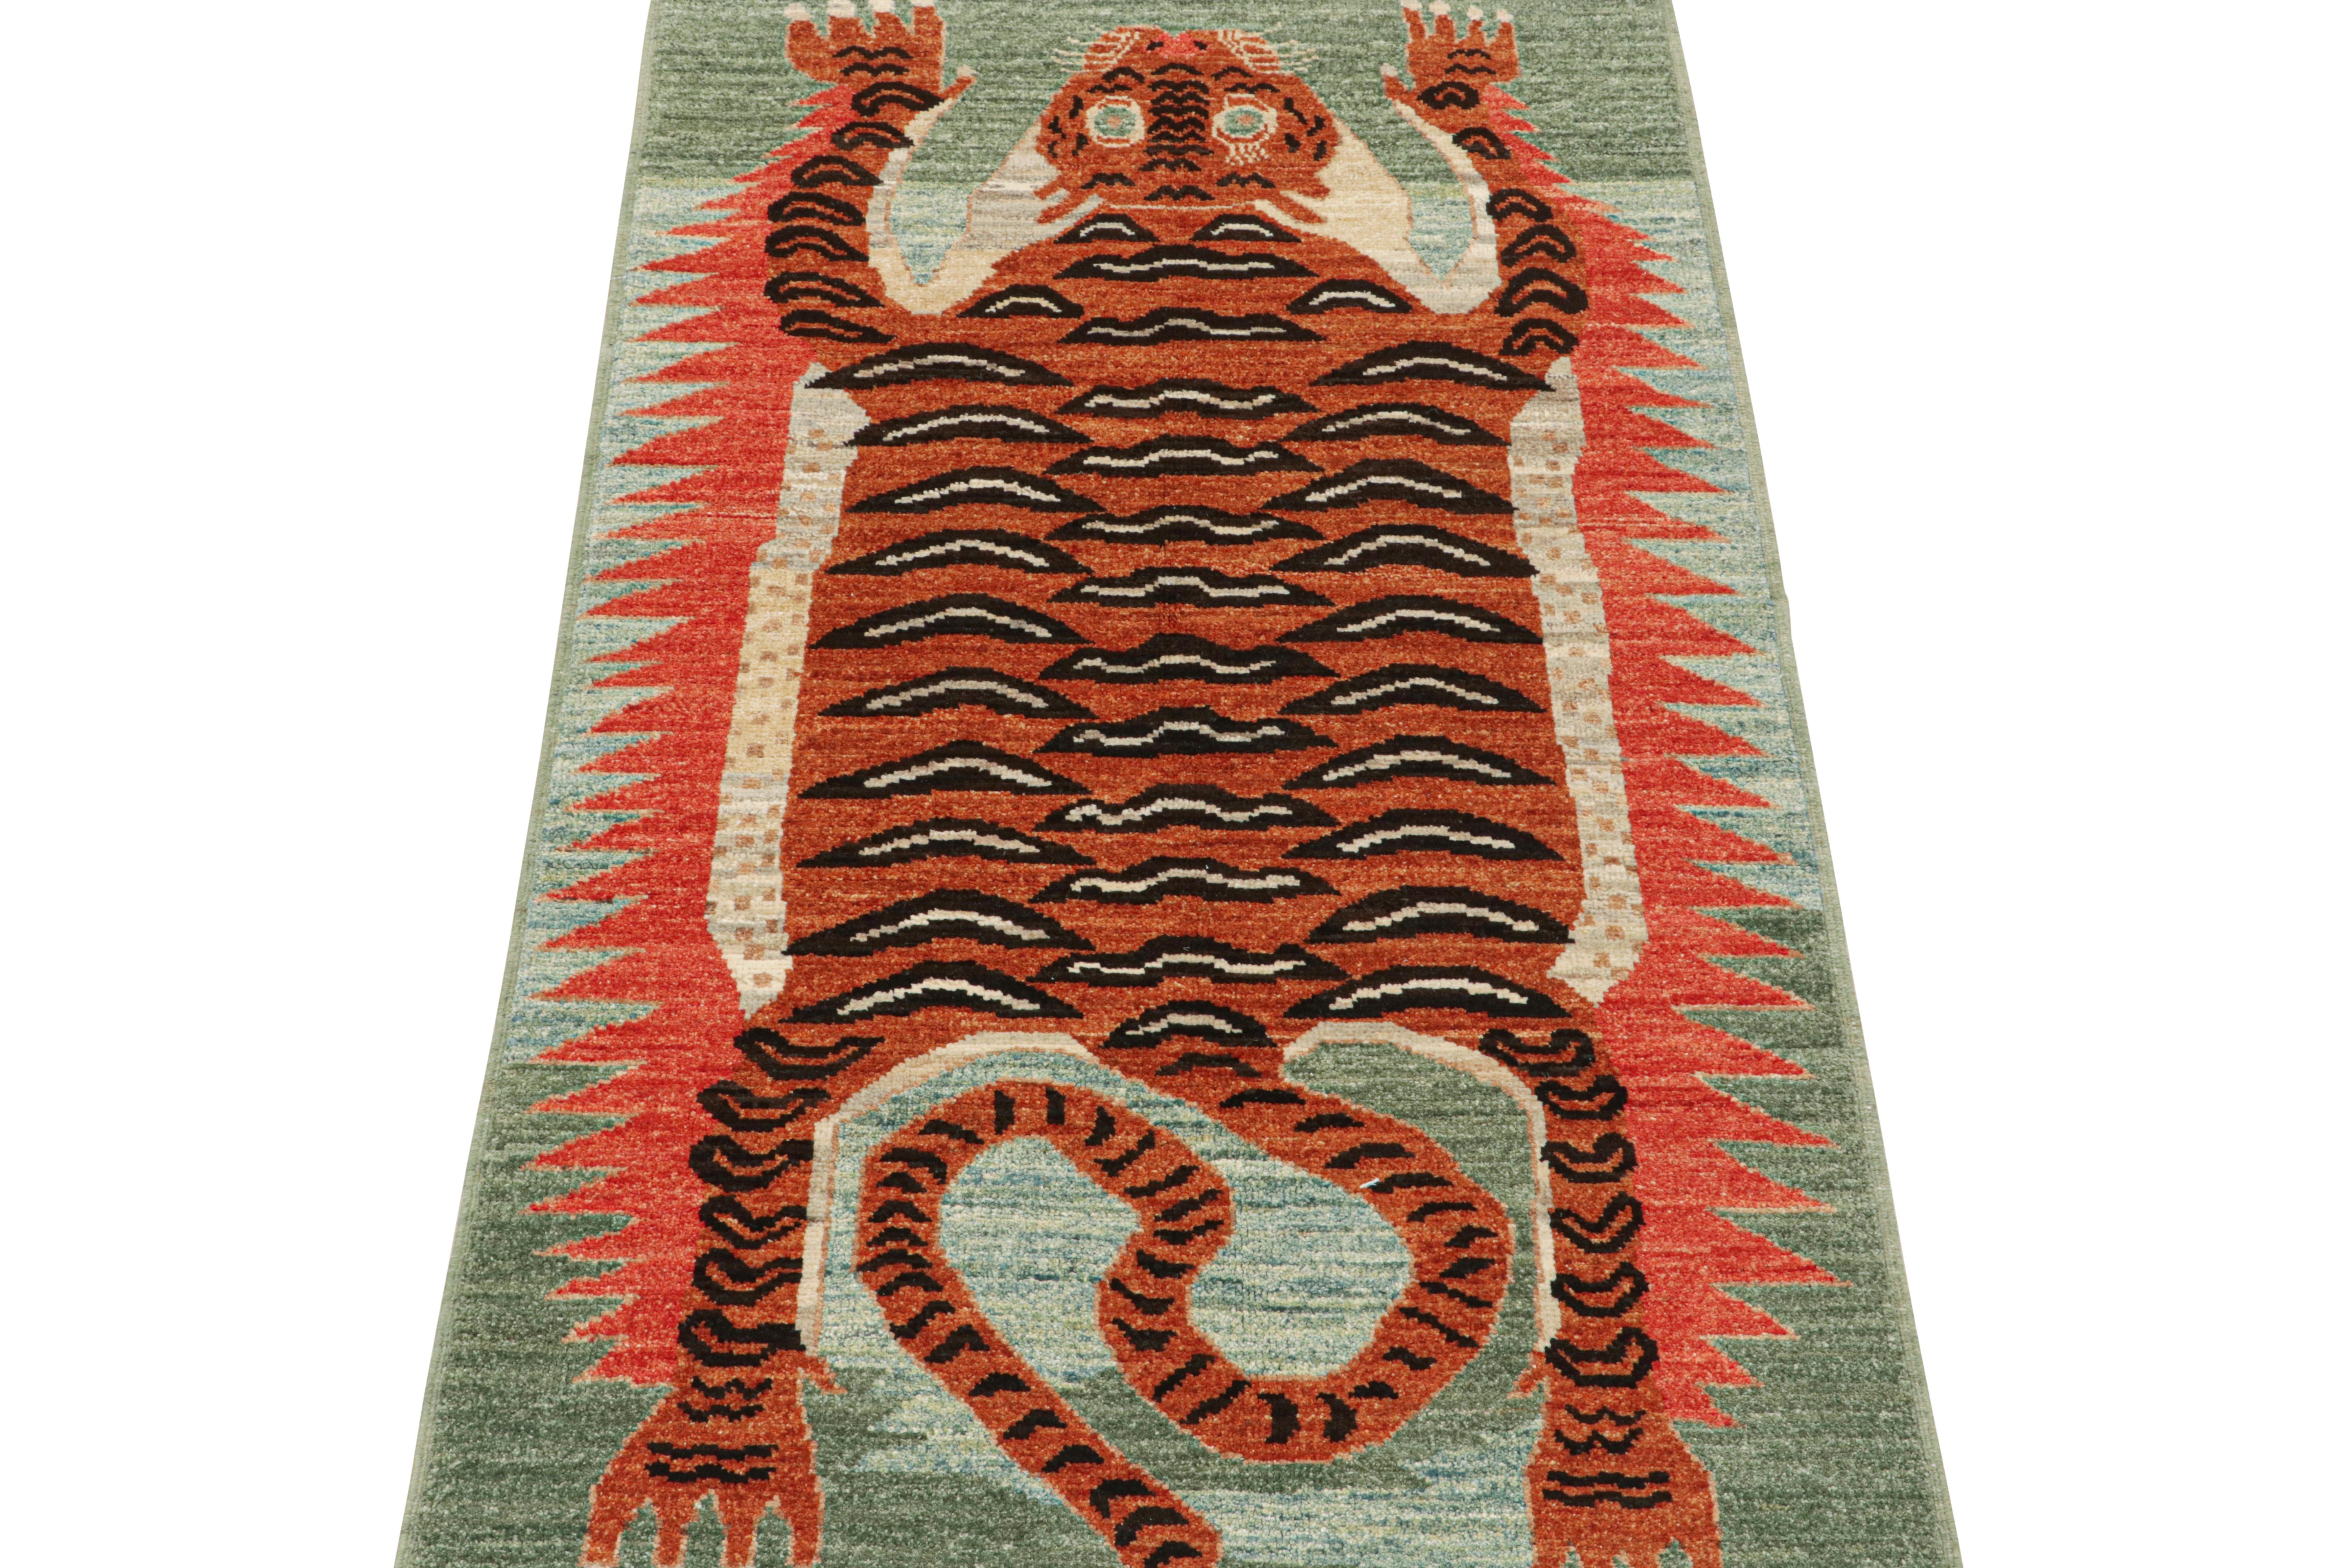 This custom runner design is a bold new addition to Rug & Kilim’s Tigers Collection. Our collection spans several cultures and recaptures iconic pictorial styles in folk art and handmade Oriental rugs alike. 

These photos reflect a 3x6 rug in